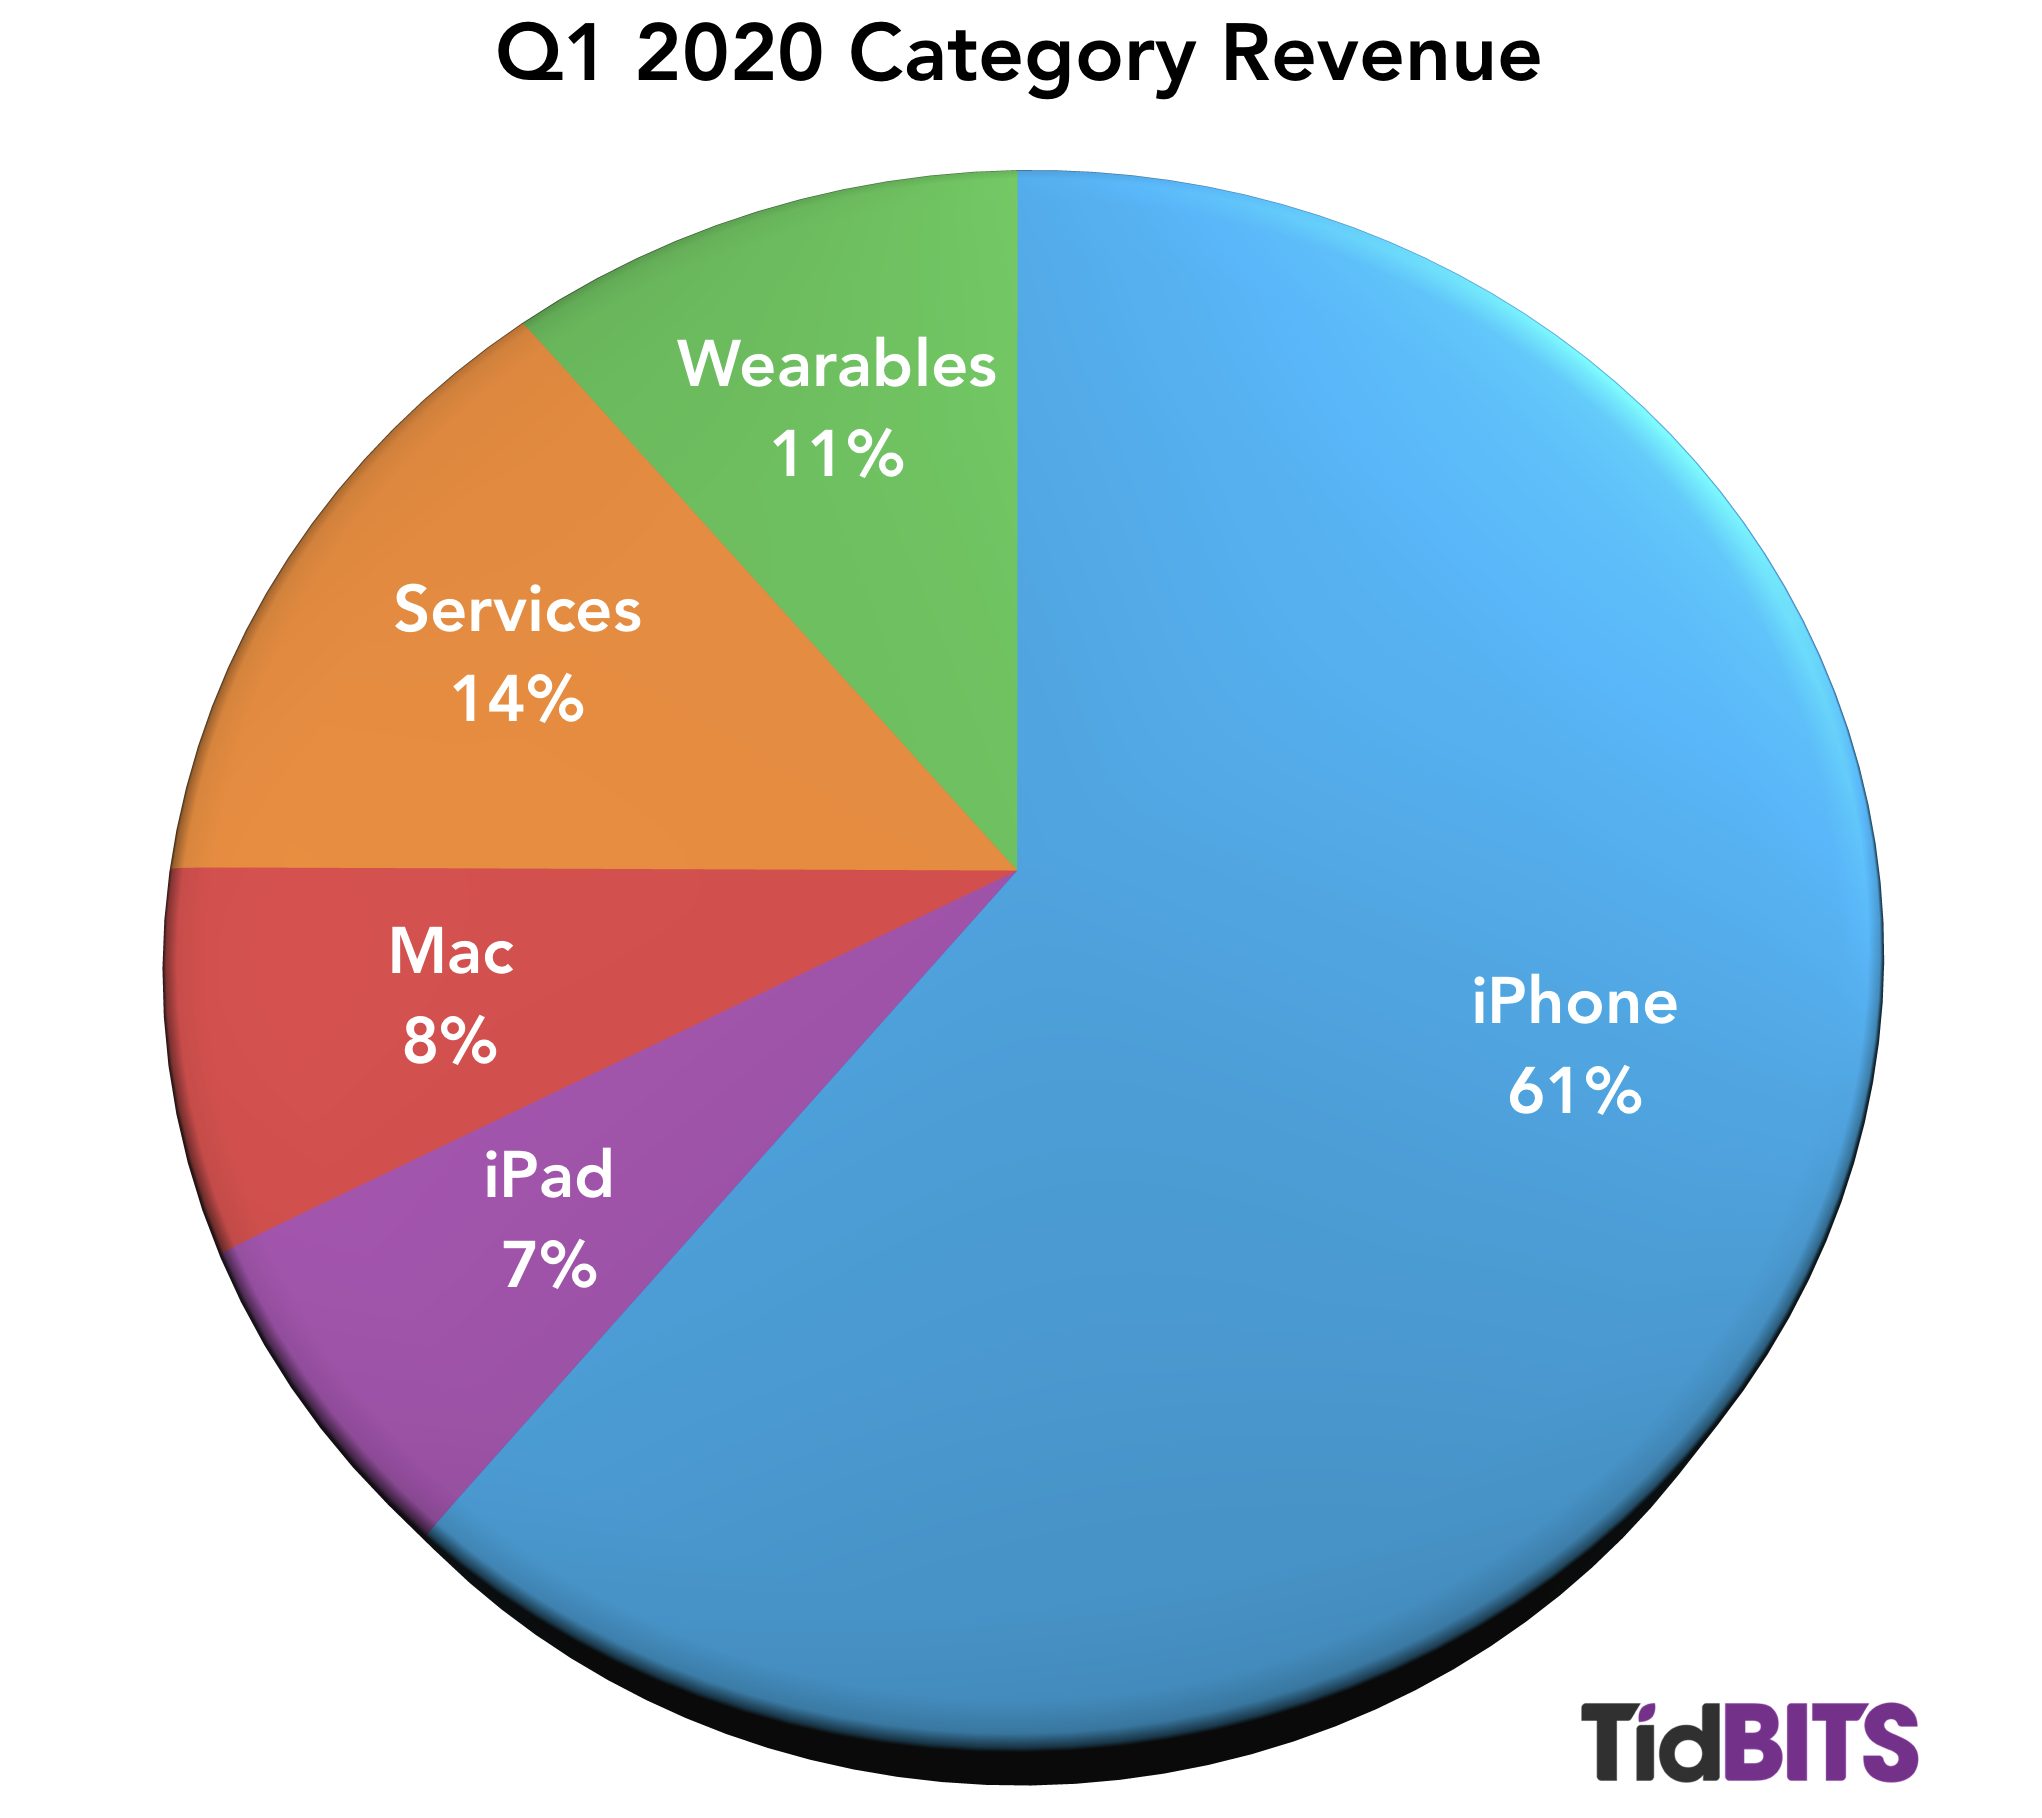 Q1 2020 revenue by product category